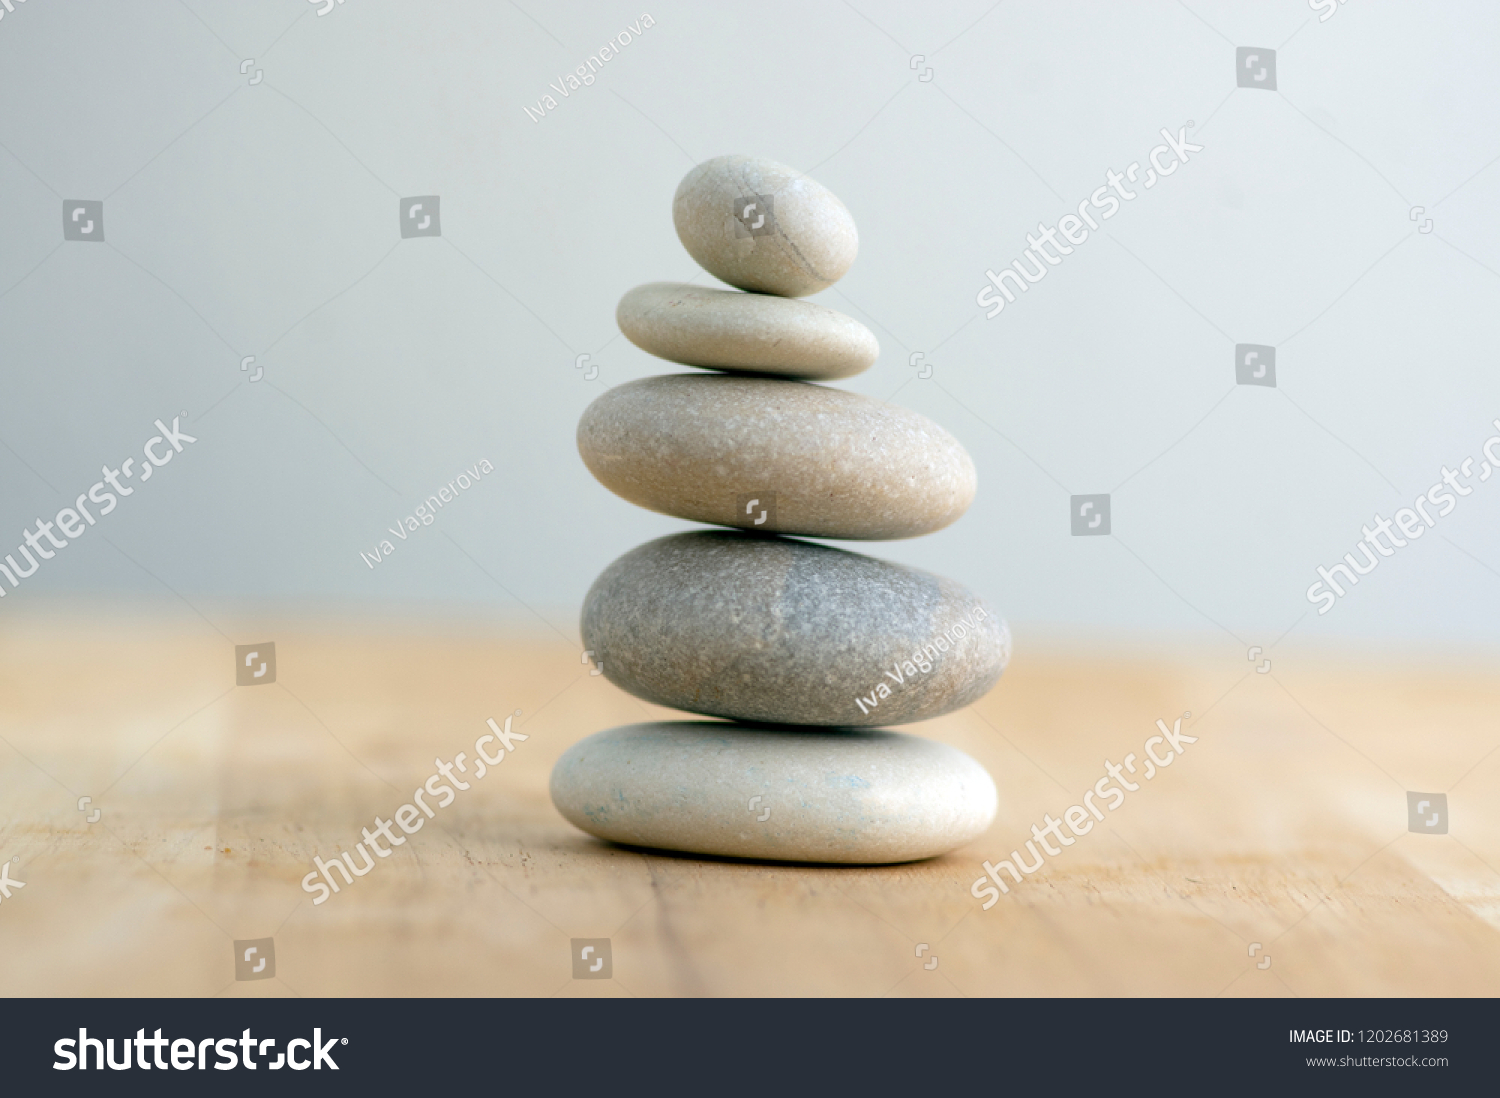 Stone cairn on striped grey white background, five stones tower, simple poise stones, simplicity harmony and balance, rock zen sculptures #1202681389